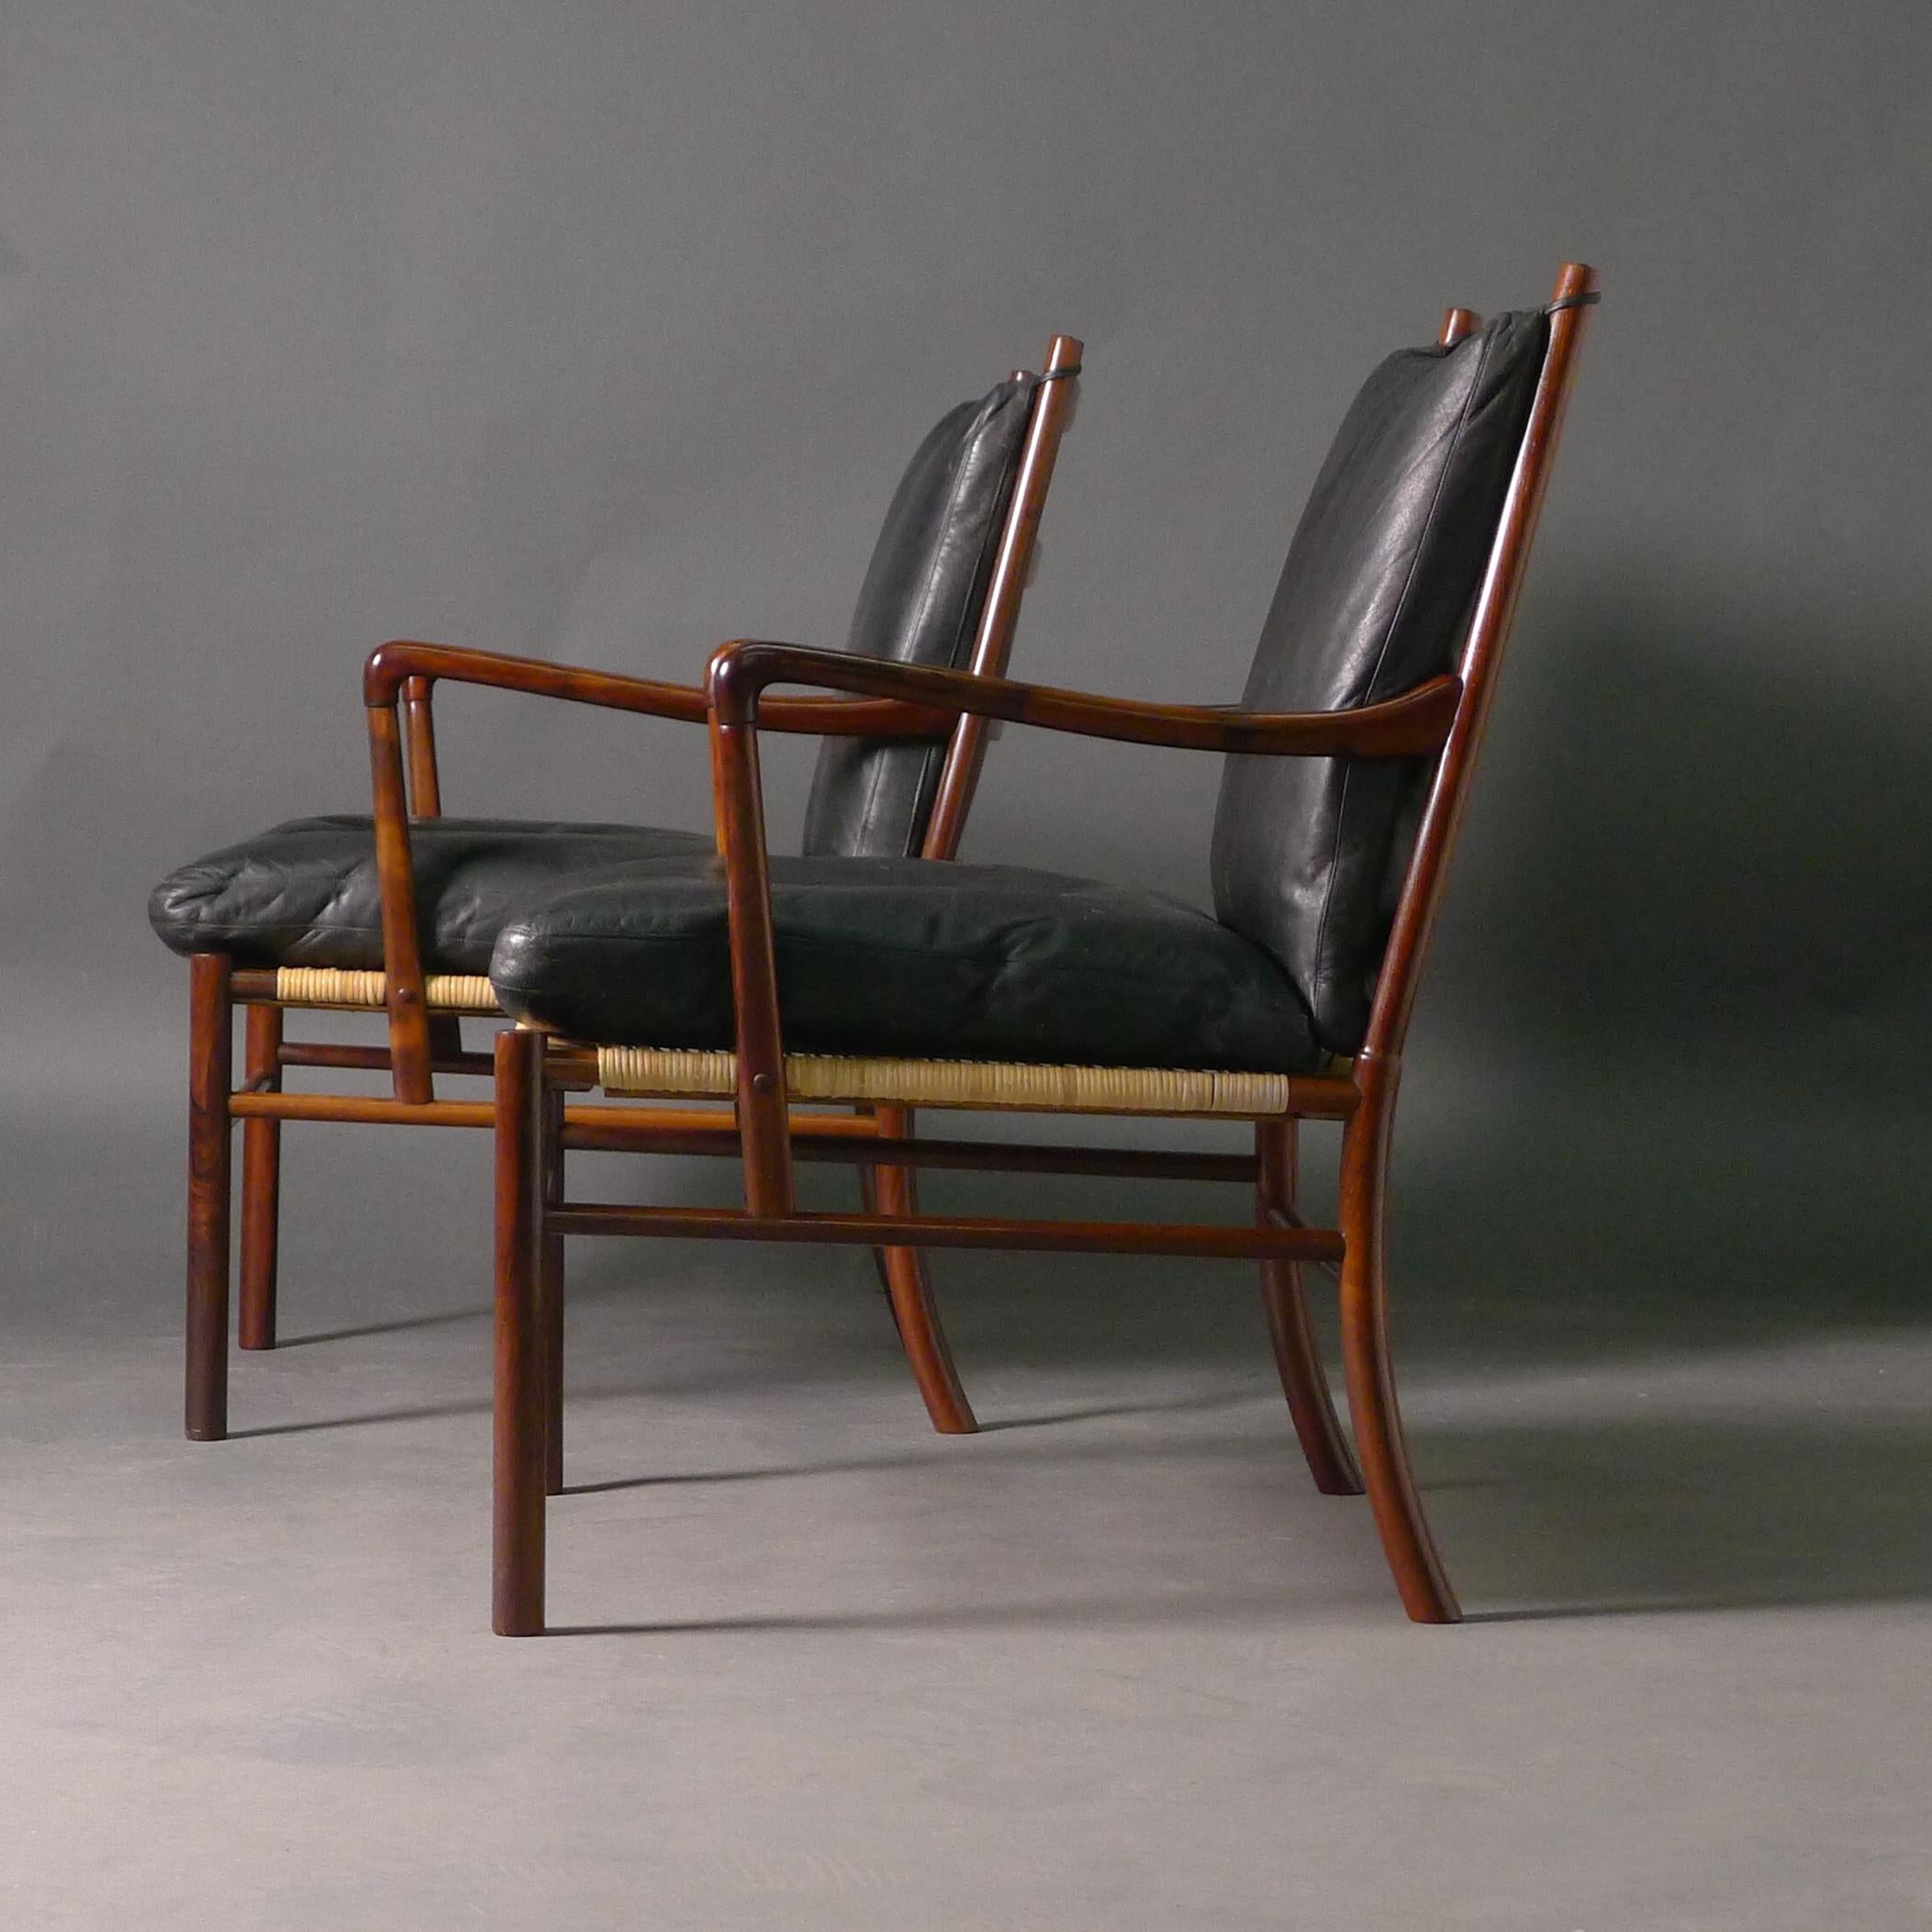 Danish Ole Wanscher, Pair of Colonial Chairs, model PJ149, 1st Edition 1949, Rosewood